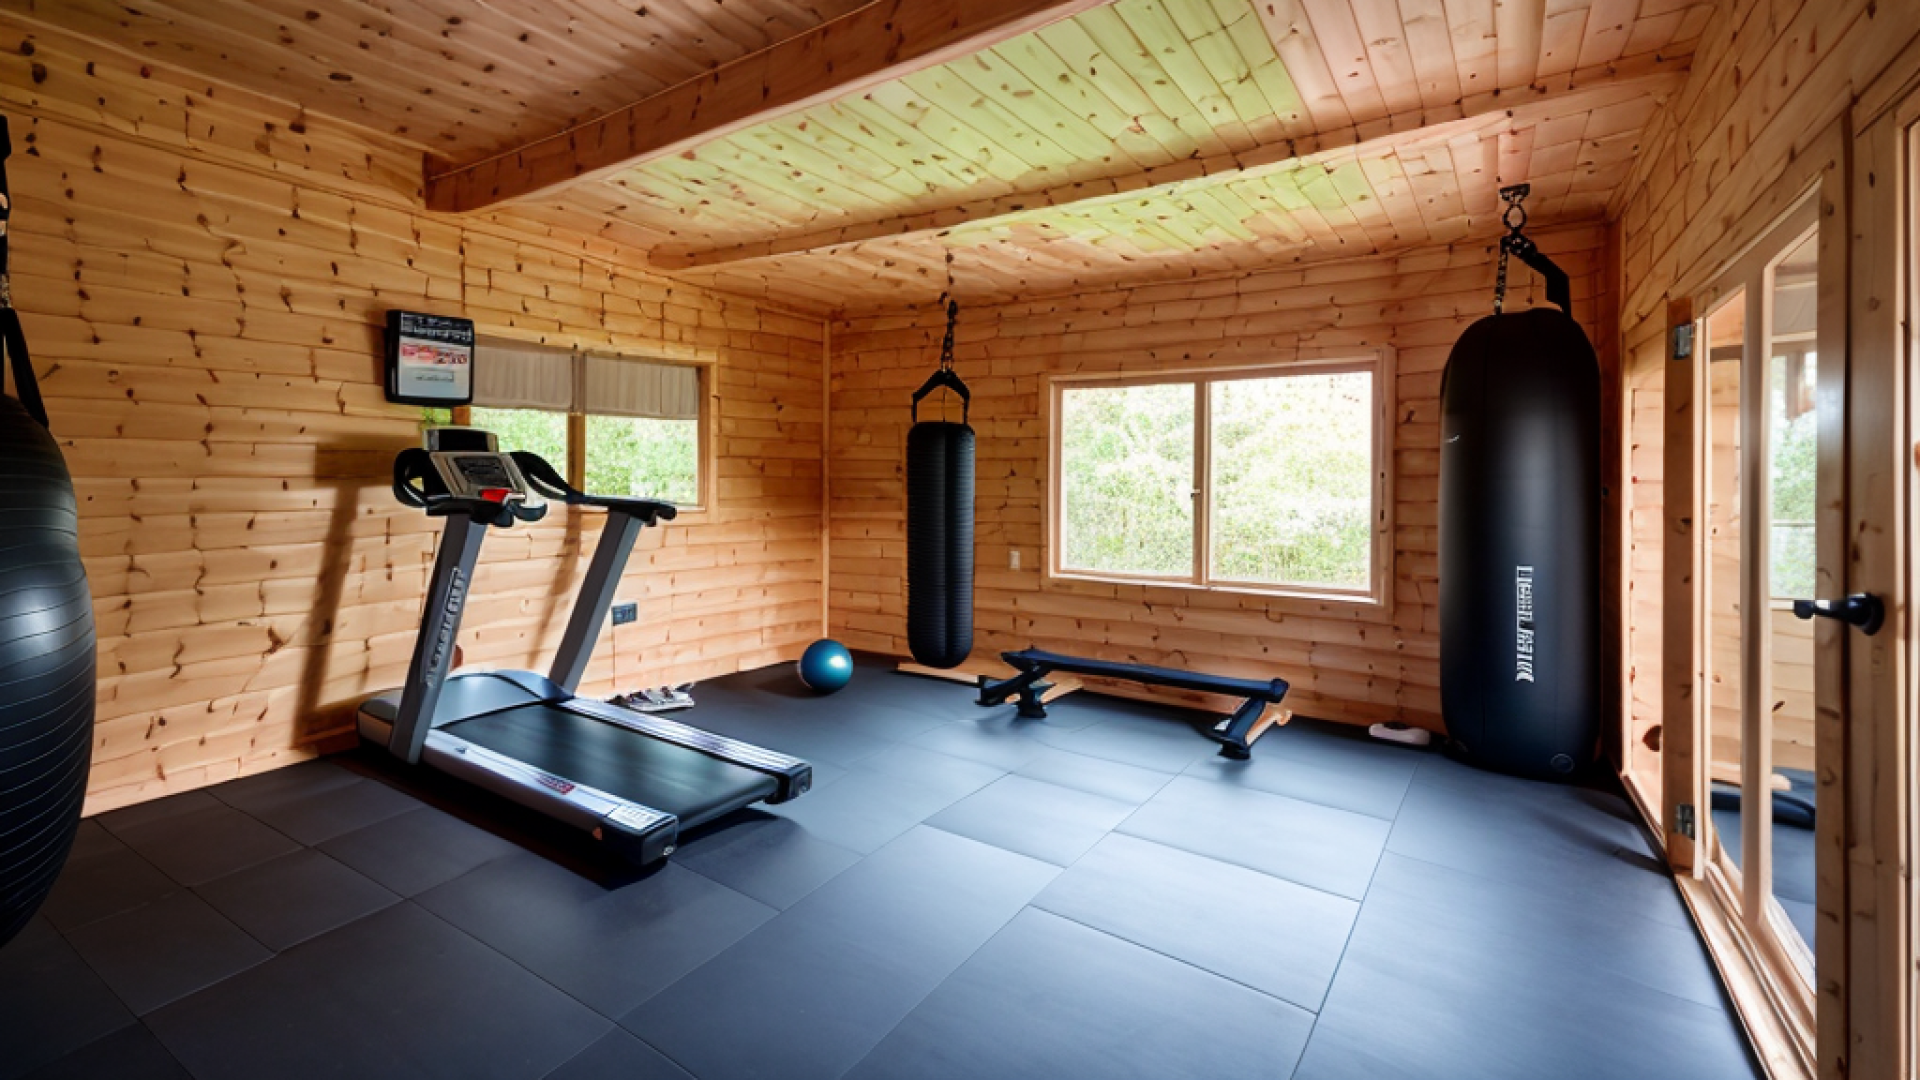 https://www.flatpacksheds.co.uk/image/cache/catalog/Blog%20Articles/ImgCreator.ai%20%20Home%20pent%20shed%20gym%20cabin%20external%20photo%20showing%20gym%20equipment-1920x1080.png